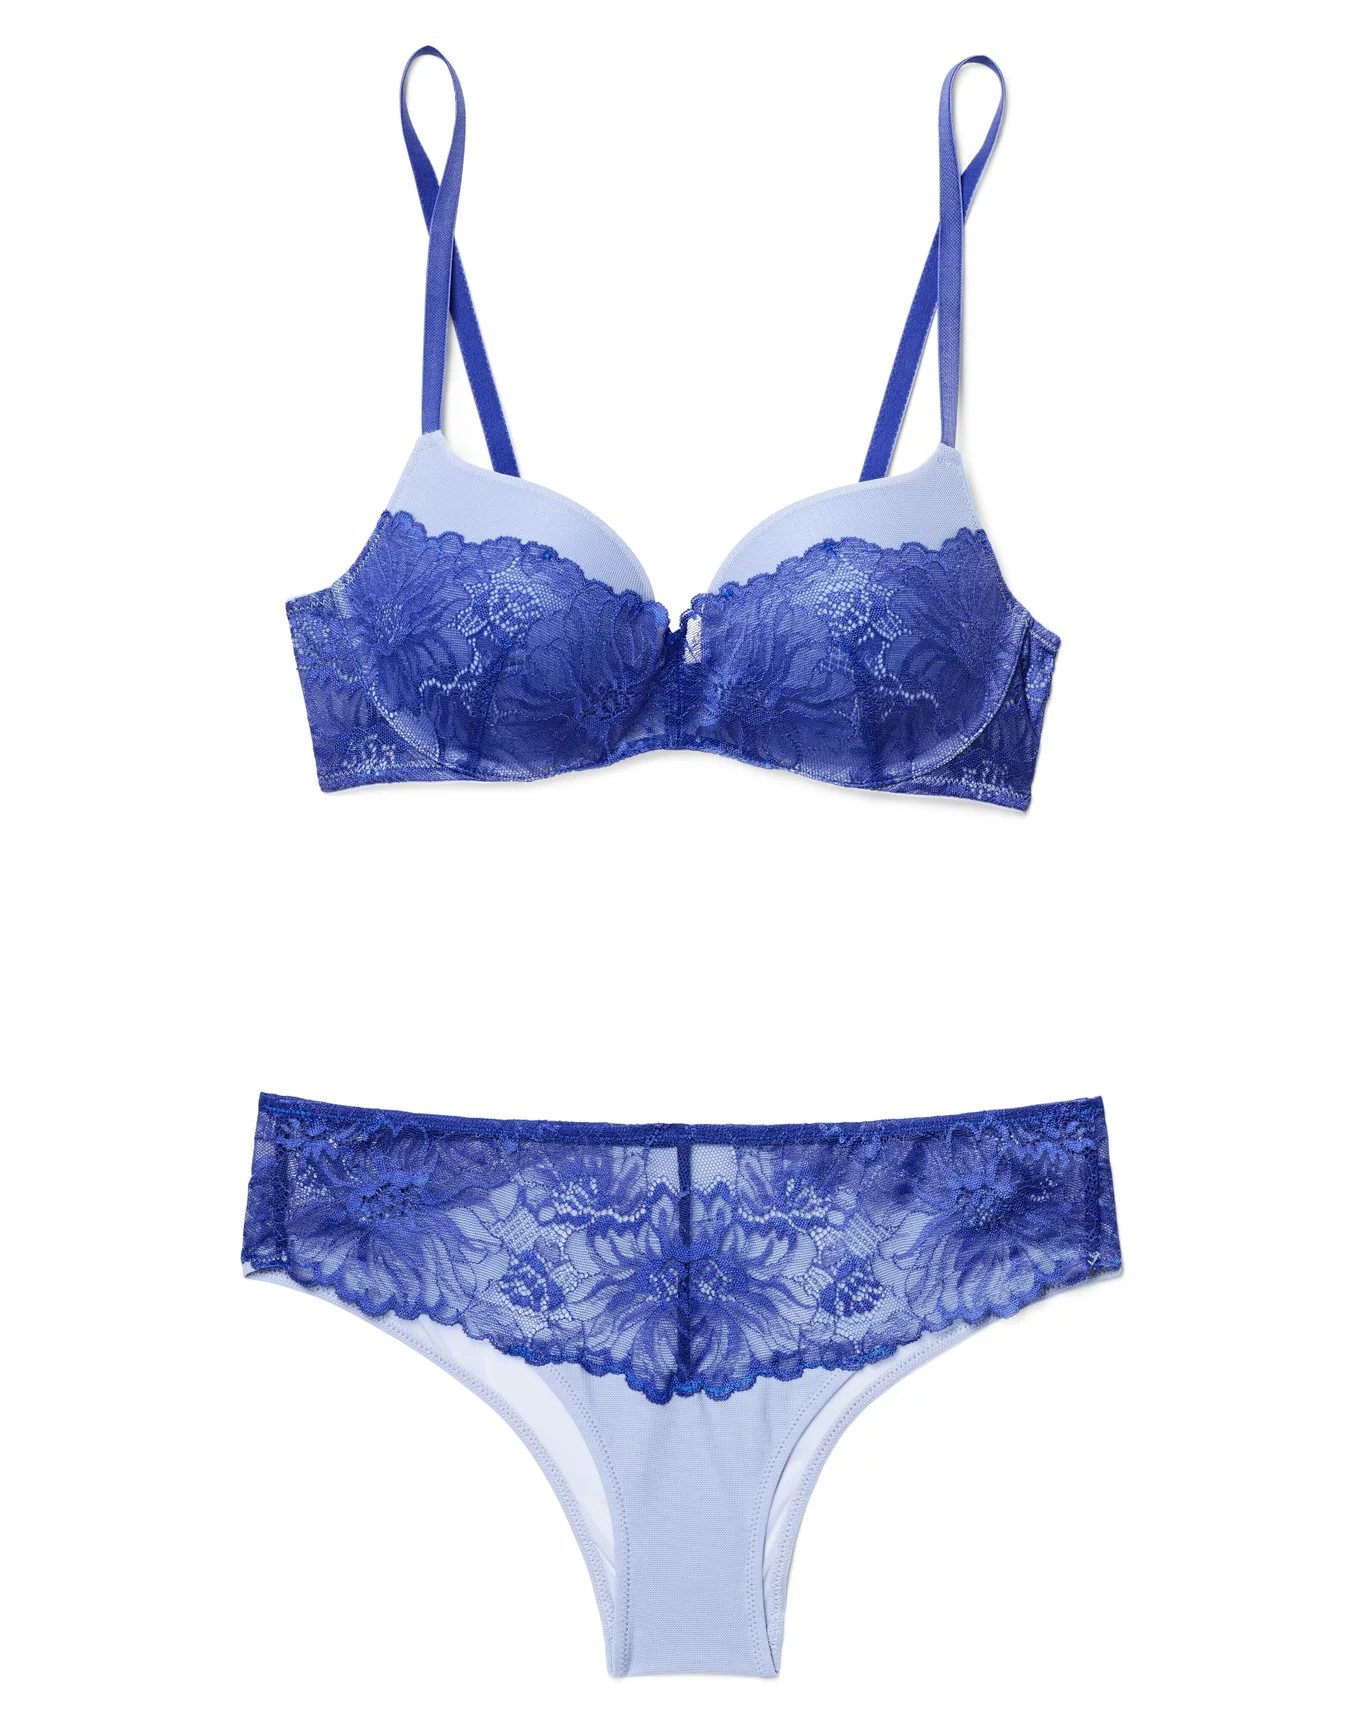 Adore Me Blue Lace Plunge Lined Bra Size 36DD - $26 New With